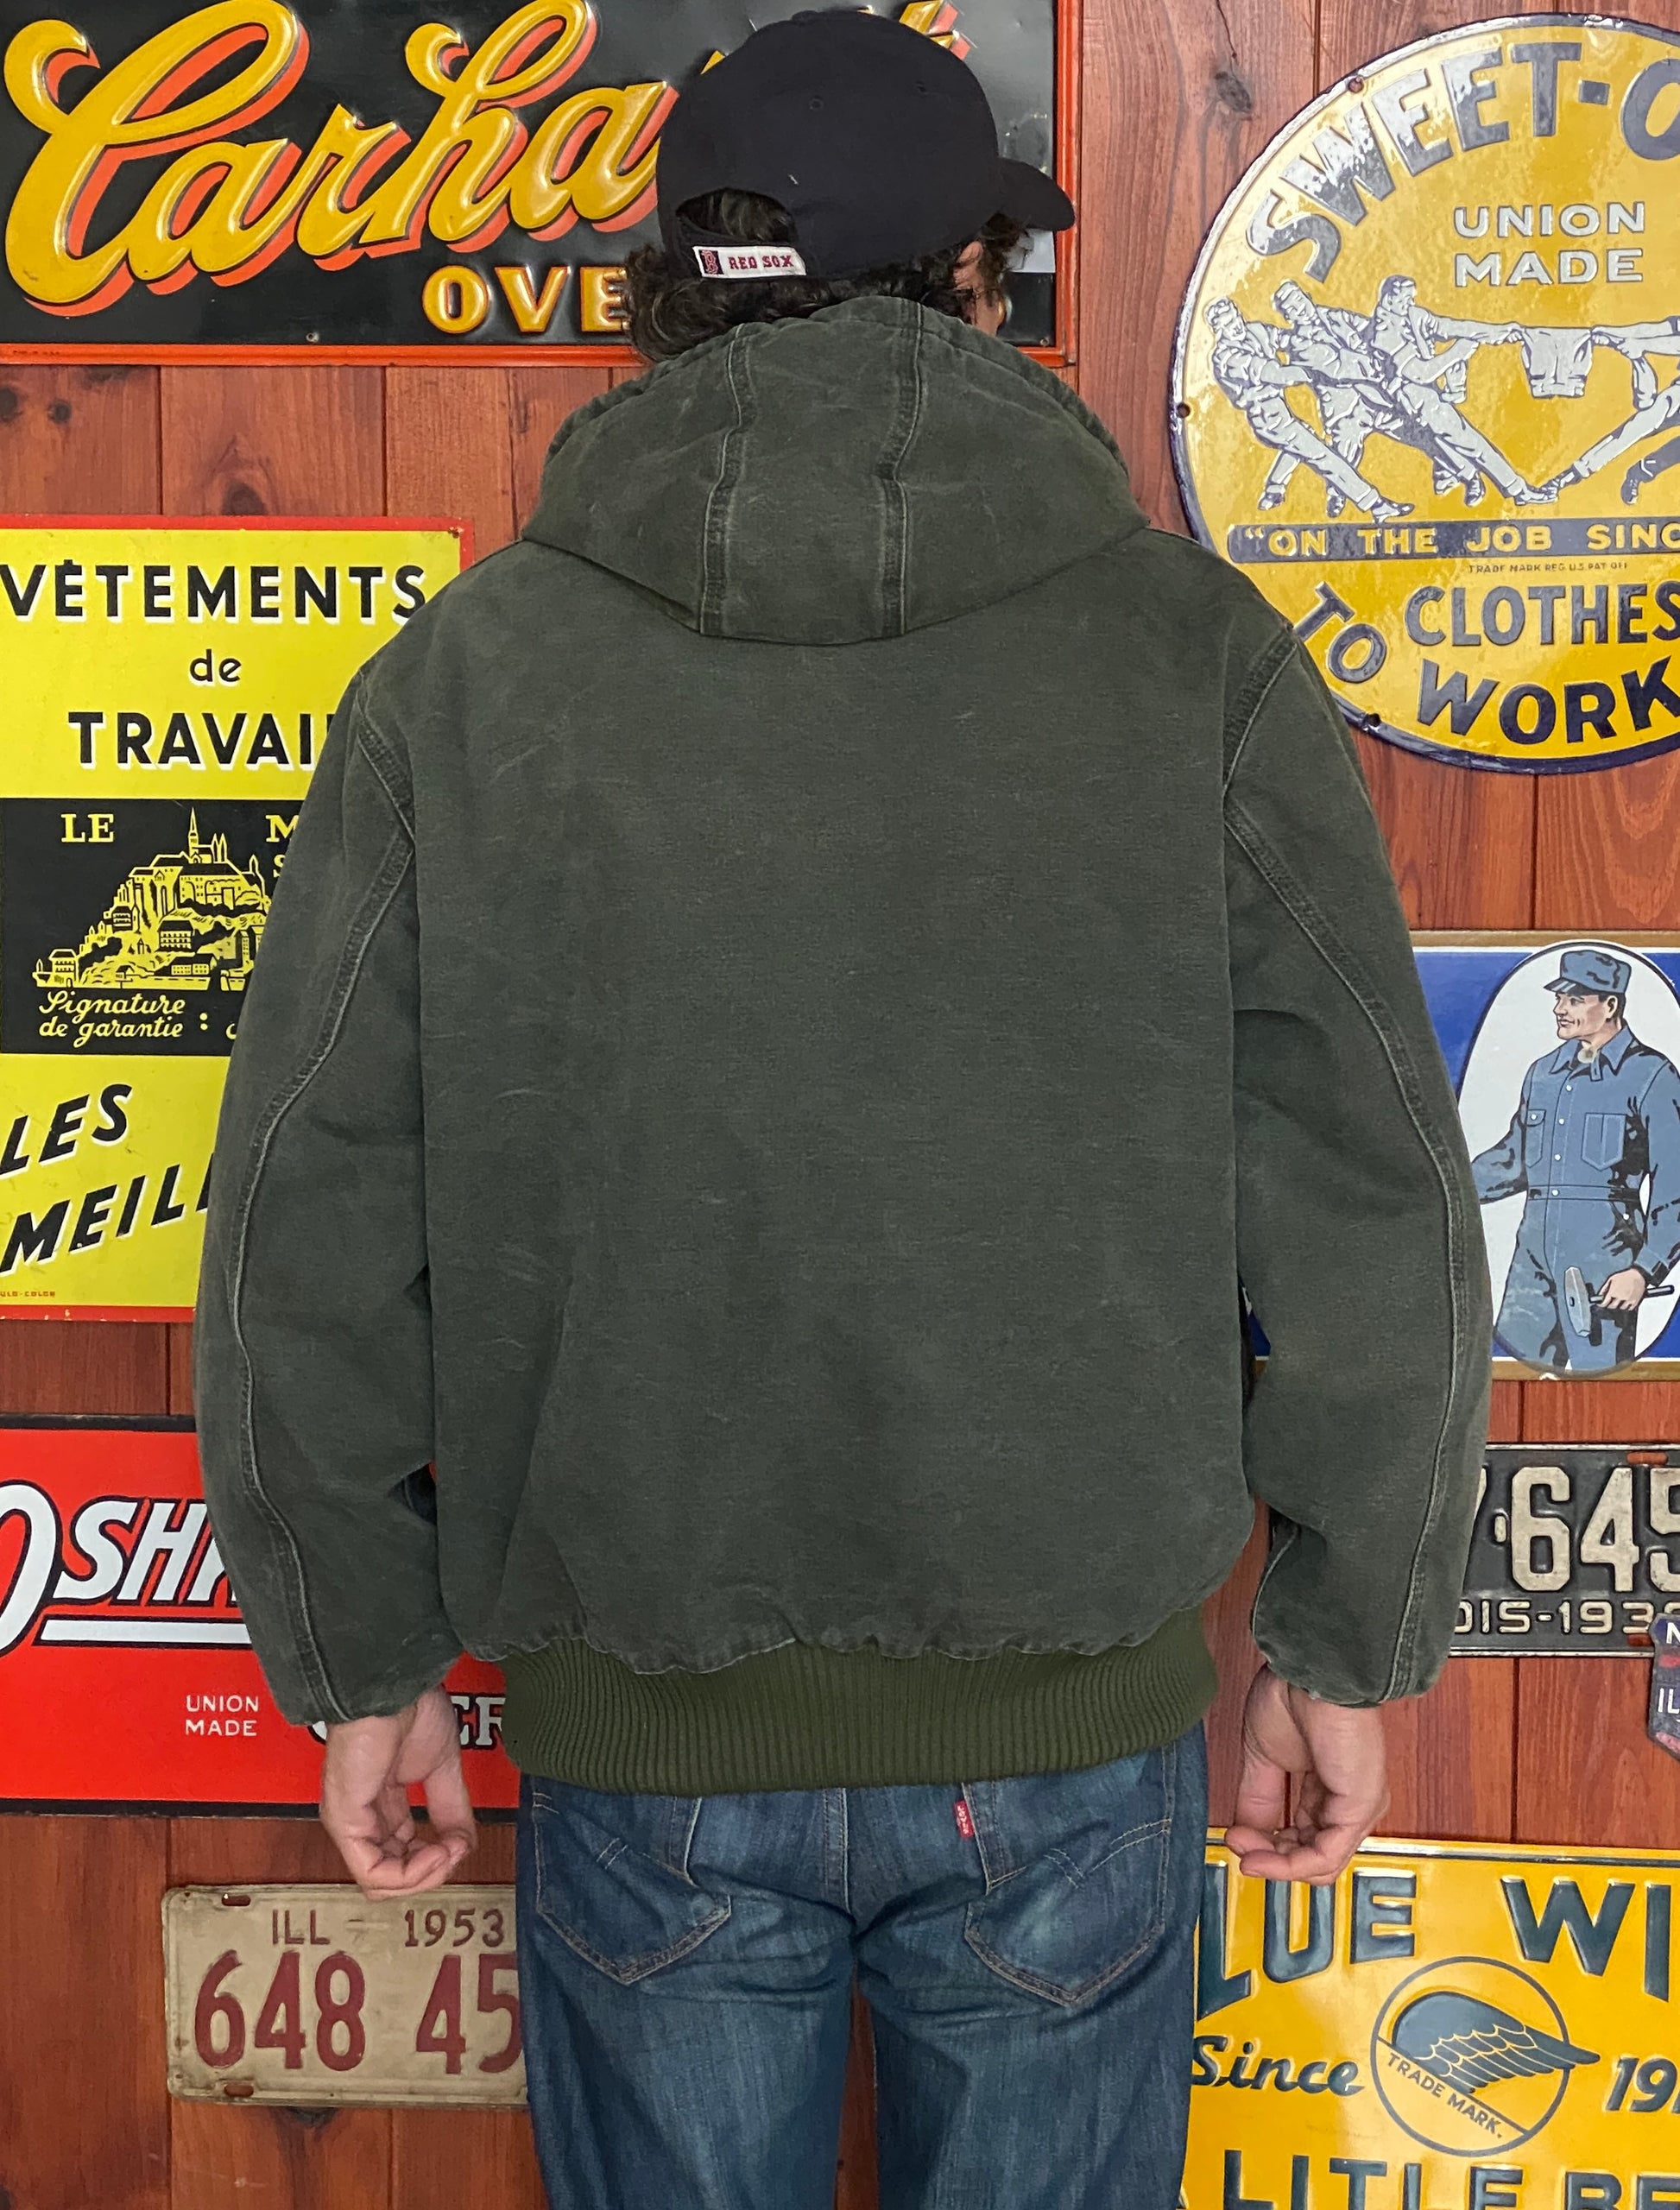 Large Green Carhartt Blanket Lined Jacket: Classic Workwear Apparel Made in Mexico